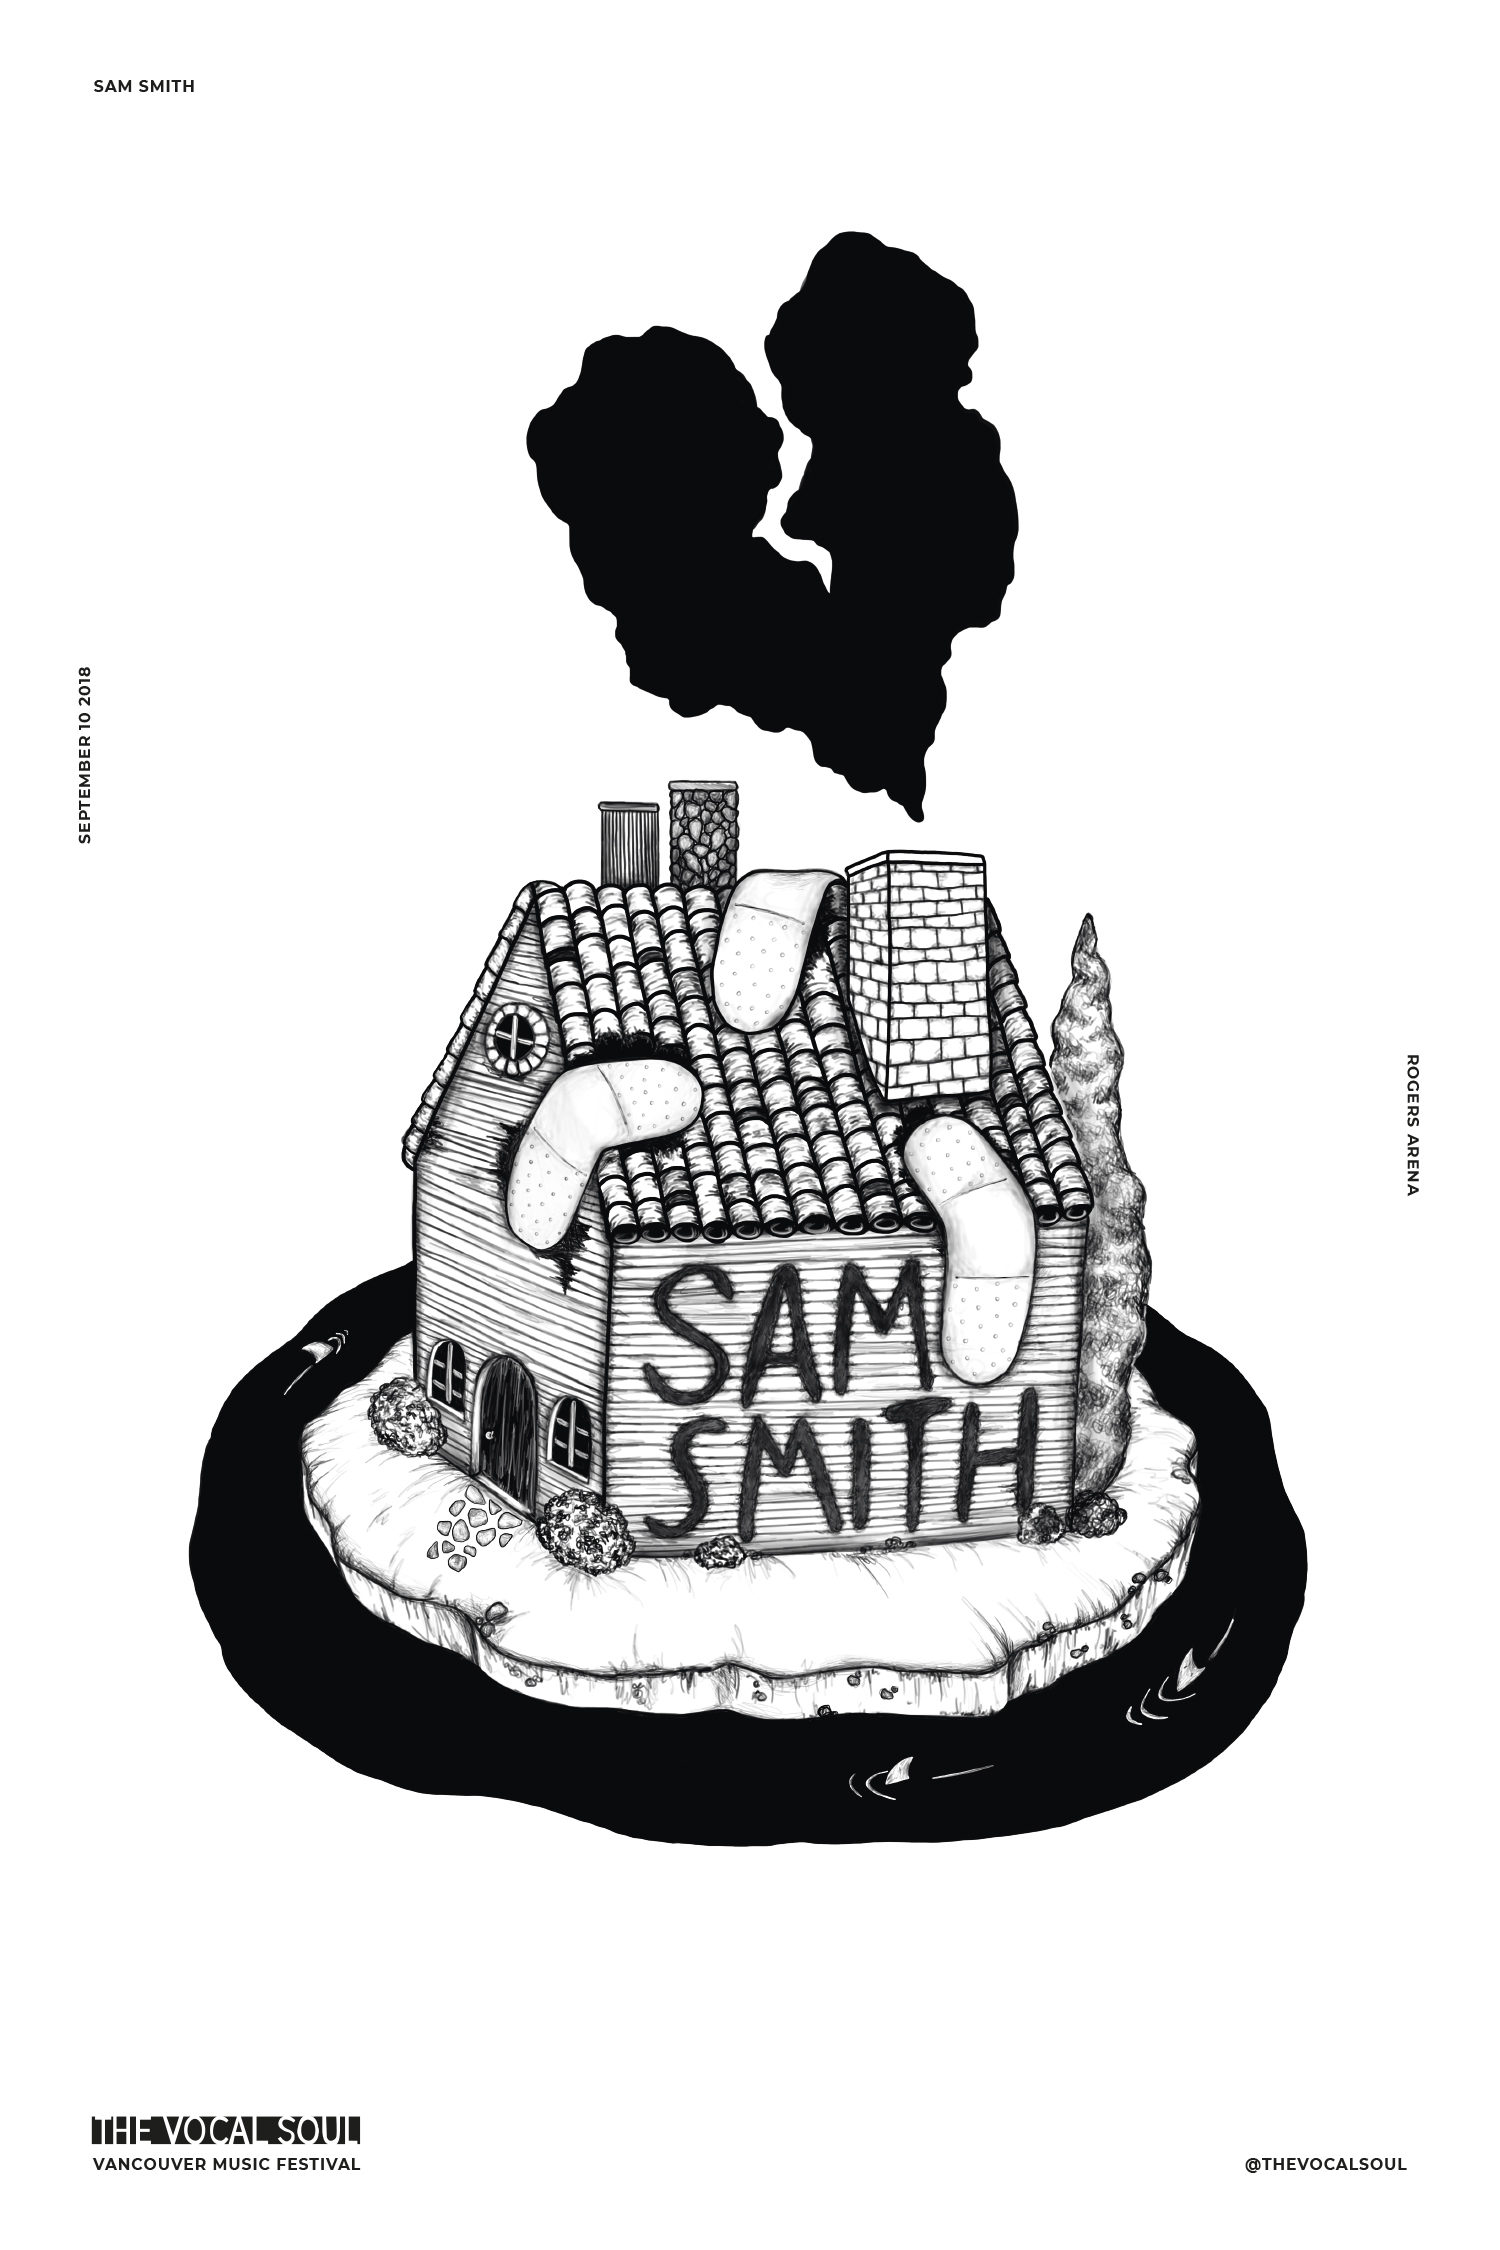 Sam Smith, The Vocal Soul, Vancouver Music Festival illustrated poster by Emily Rose